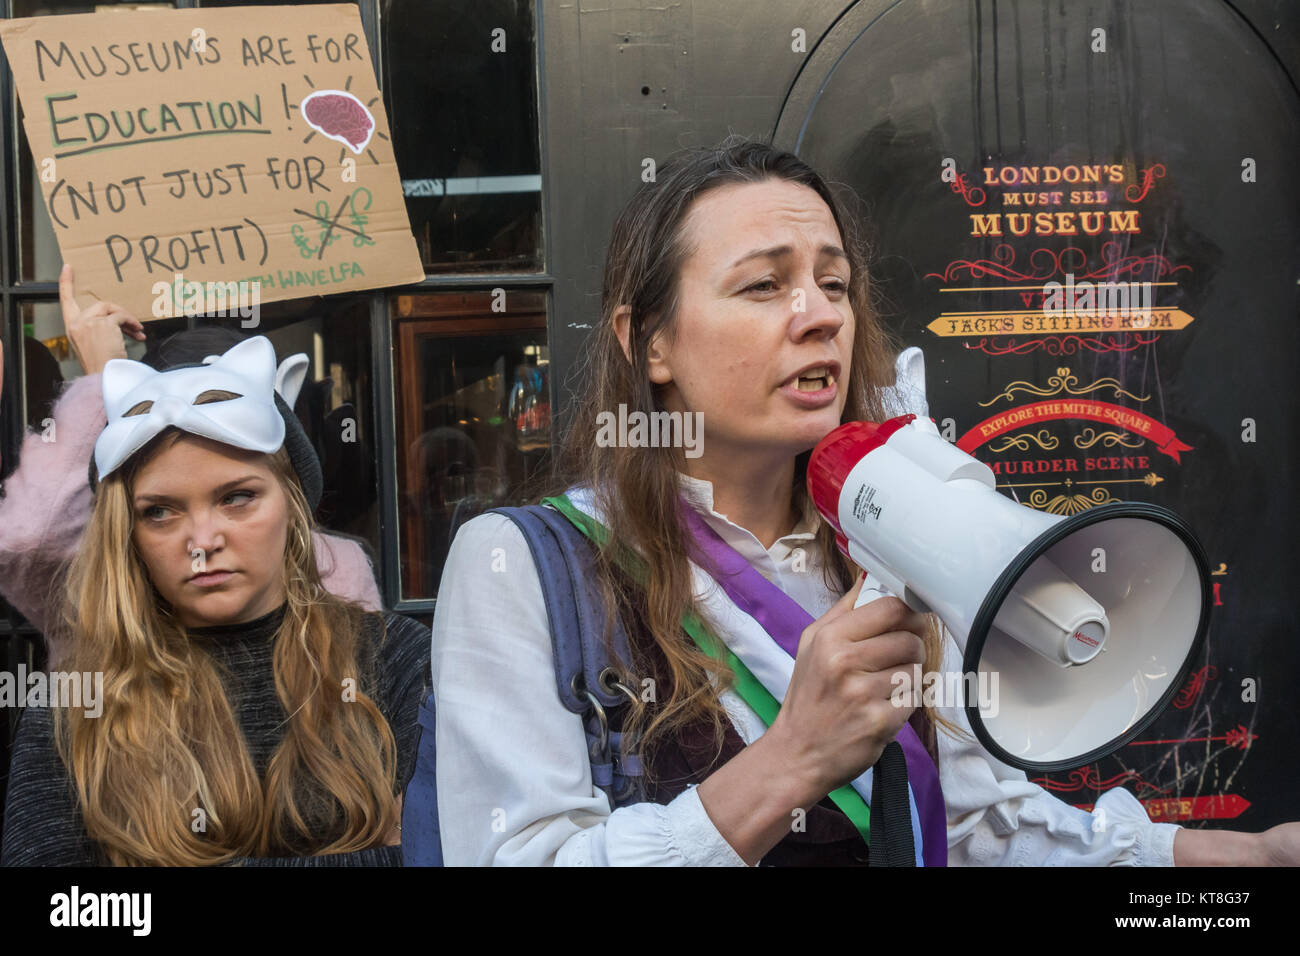 A woman with 'Dracula' fangs and a Suffragette sash speaks at the Fourth Wave LFA protest at Ripper 'museum' in Cable St after macabre and highly misogynist Halloween publicity. Stock Photo